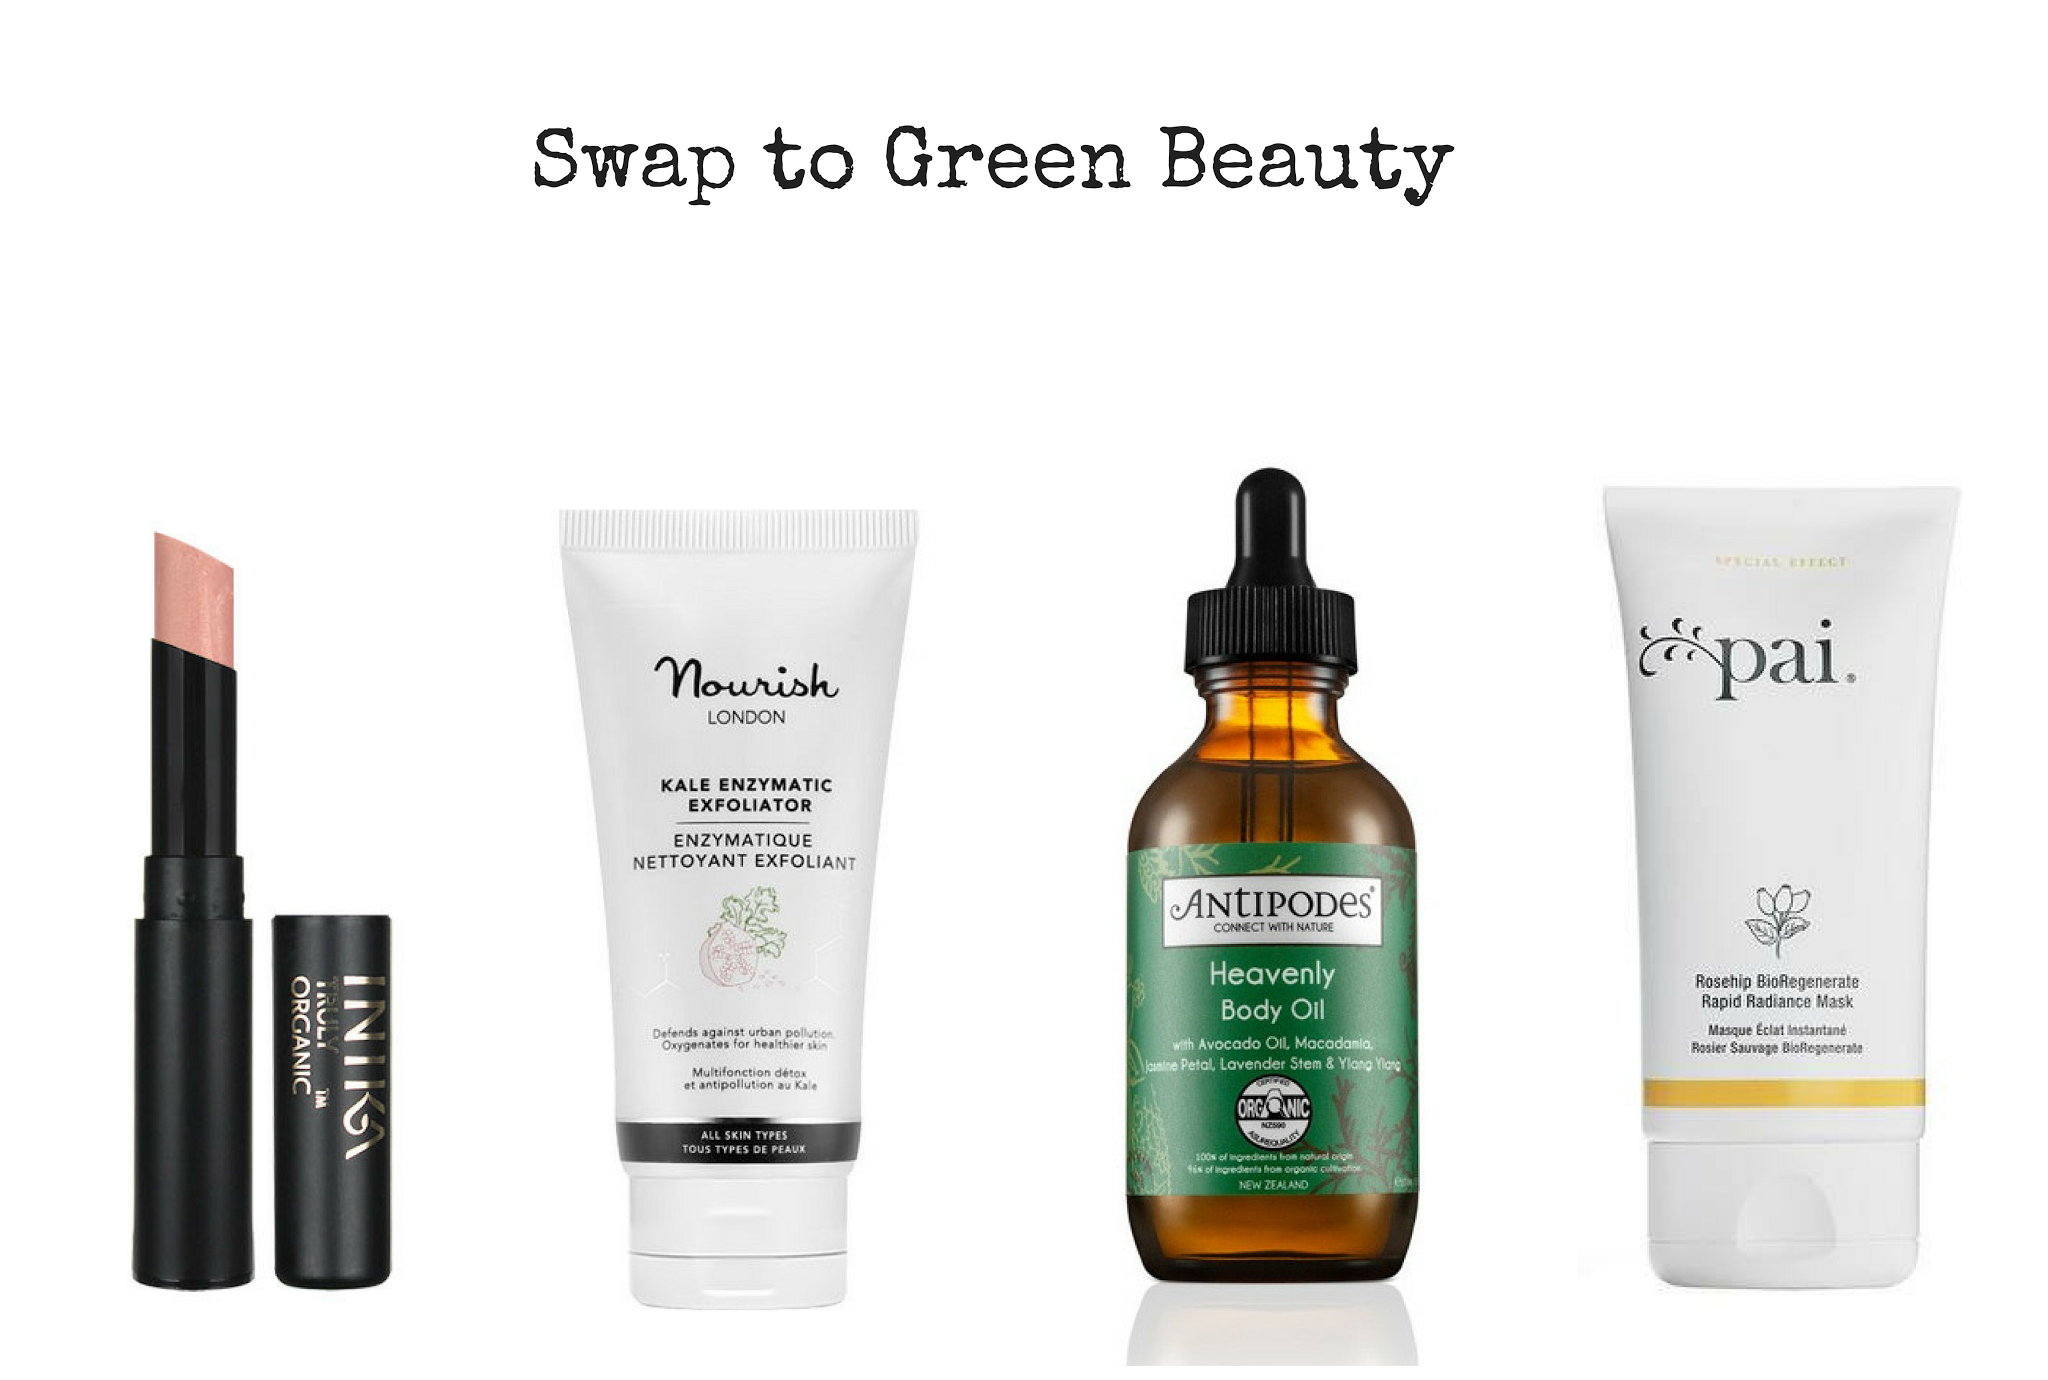 Swap clairns glossier palmers the body shop for green beauty alternatives